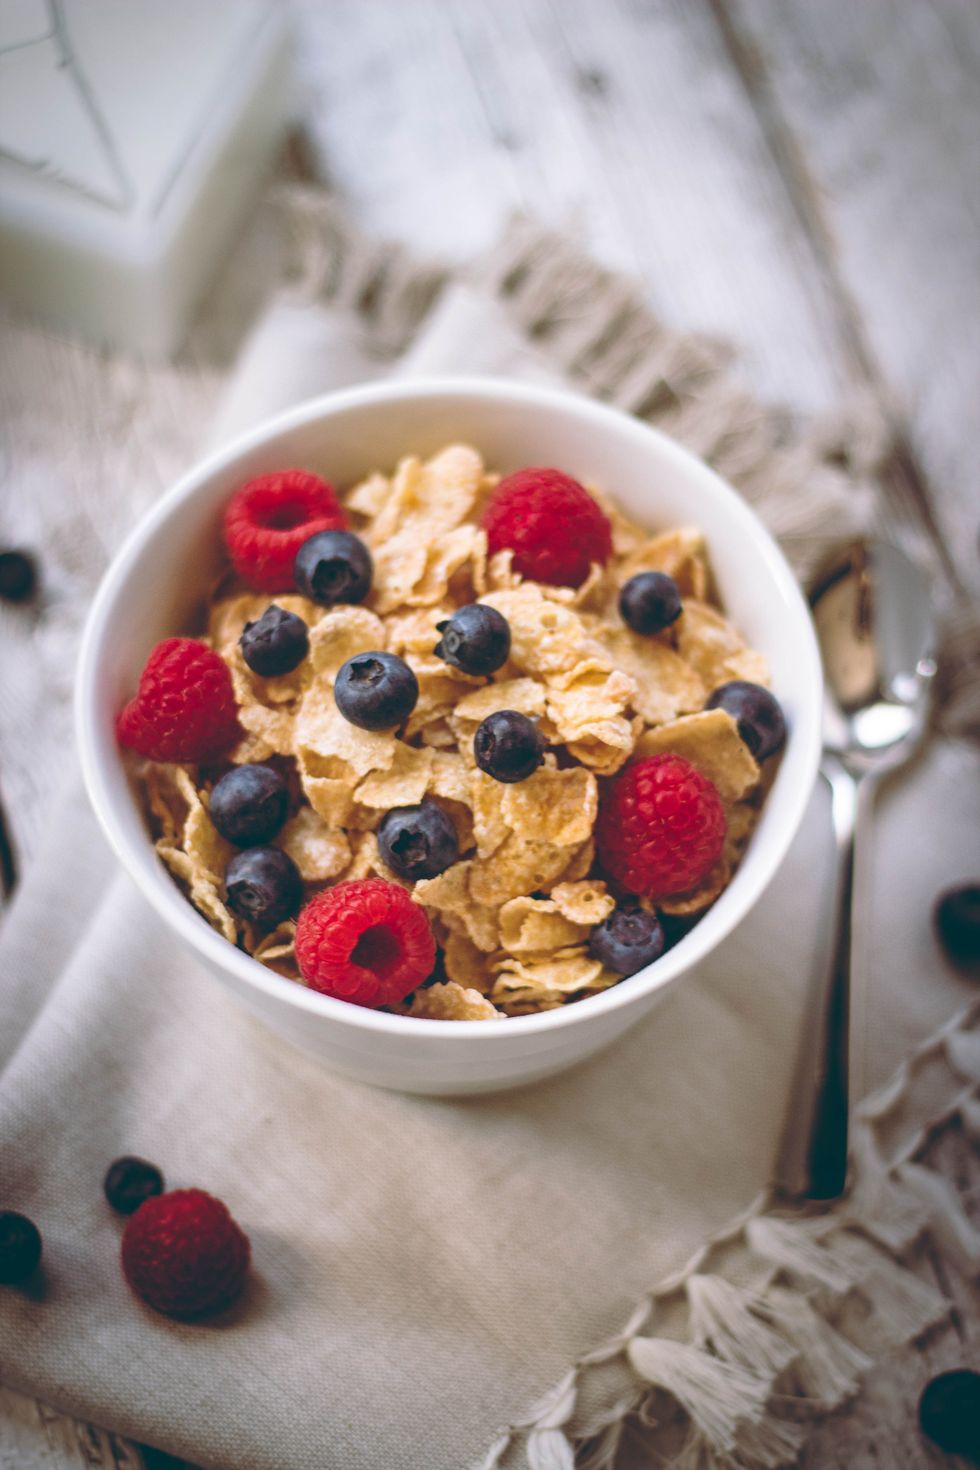 <p>Even if it's a hearty, healthy version, cold cereal isn't going to keep you full for very long because there's not a lot of water content. "<a href="http://ajcn.nutrition.org/content/70/4/448.full">Studies show</a> that when water is incorporated into a food, it's going to fill you up more than food with a lower water content," says <a href="https://dawnjacksonblatner.com/">Dawn Jackson Blatner</a>, RD, author of <em>The Superfood Swap Diet</em>. "Think about holding a box of dry cereal—it's super light. You can probably eat most of the box in one sitting," she explains. Sure, you're going to get whole grains, fiber, and vitamins, just as the box claims, but you're not going to feel full for very long. </p><p>A better idea: Focus on foods with high-water content, like cooked oatmeal or overnight oats, which have been soaked in water or almond milk overnight.</p>